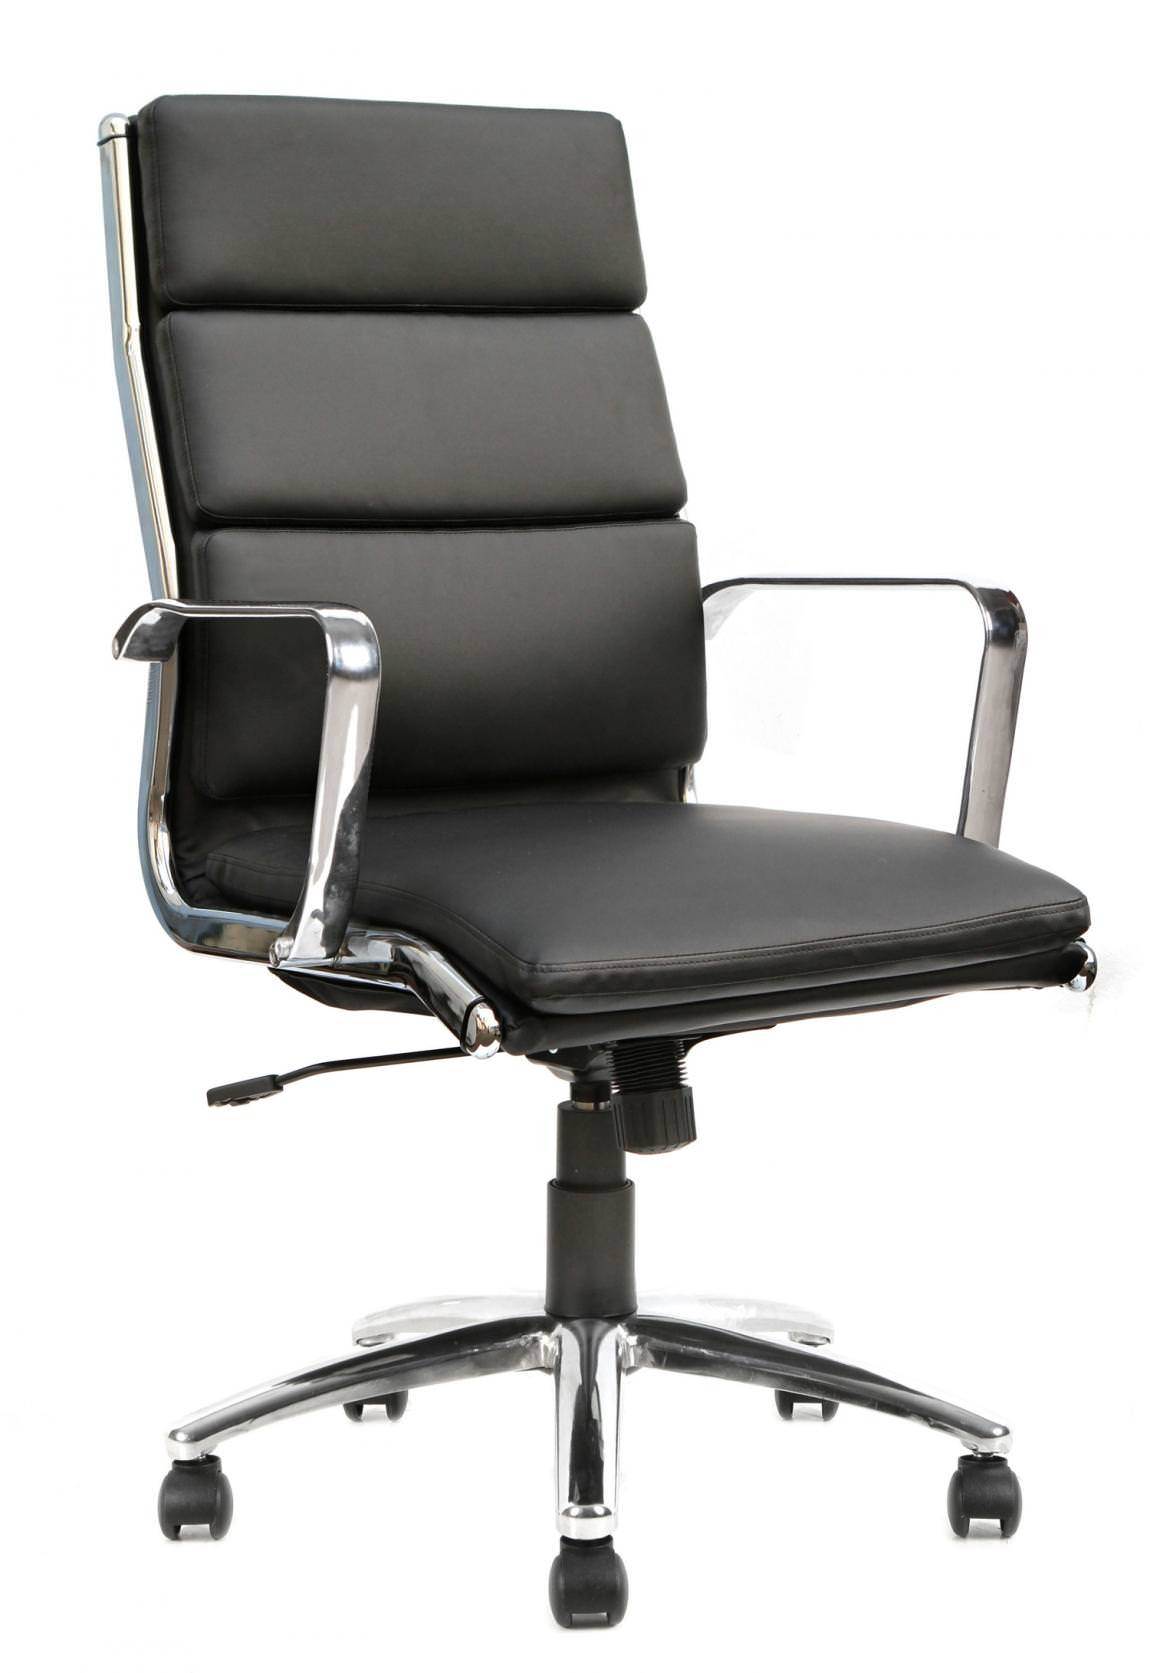 chair for conference room